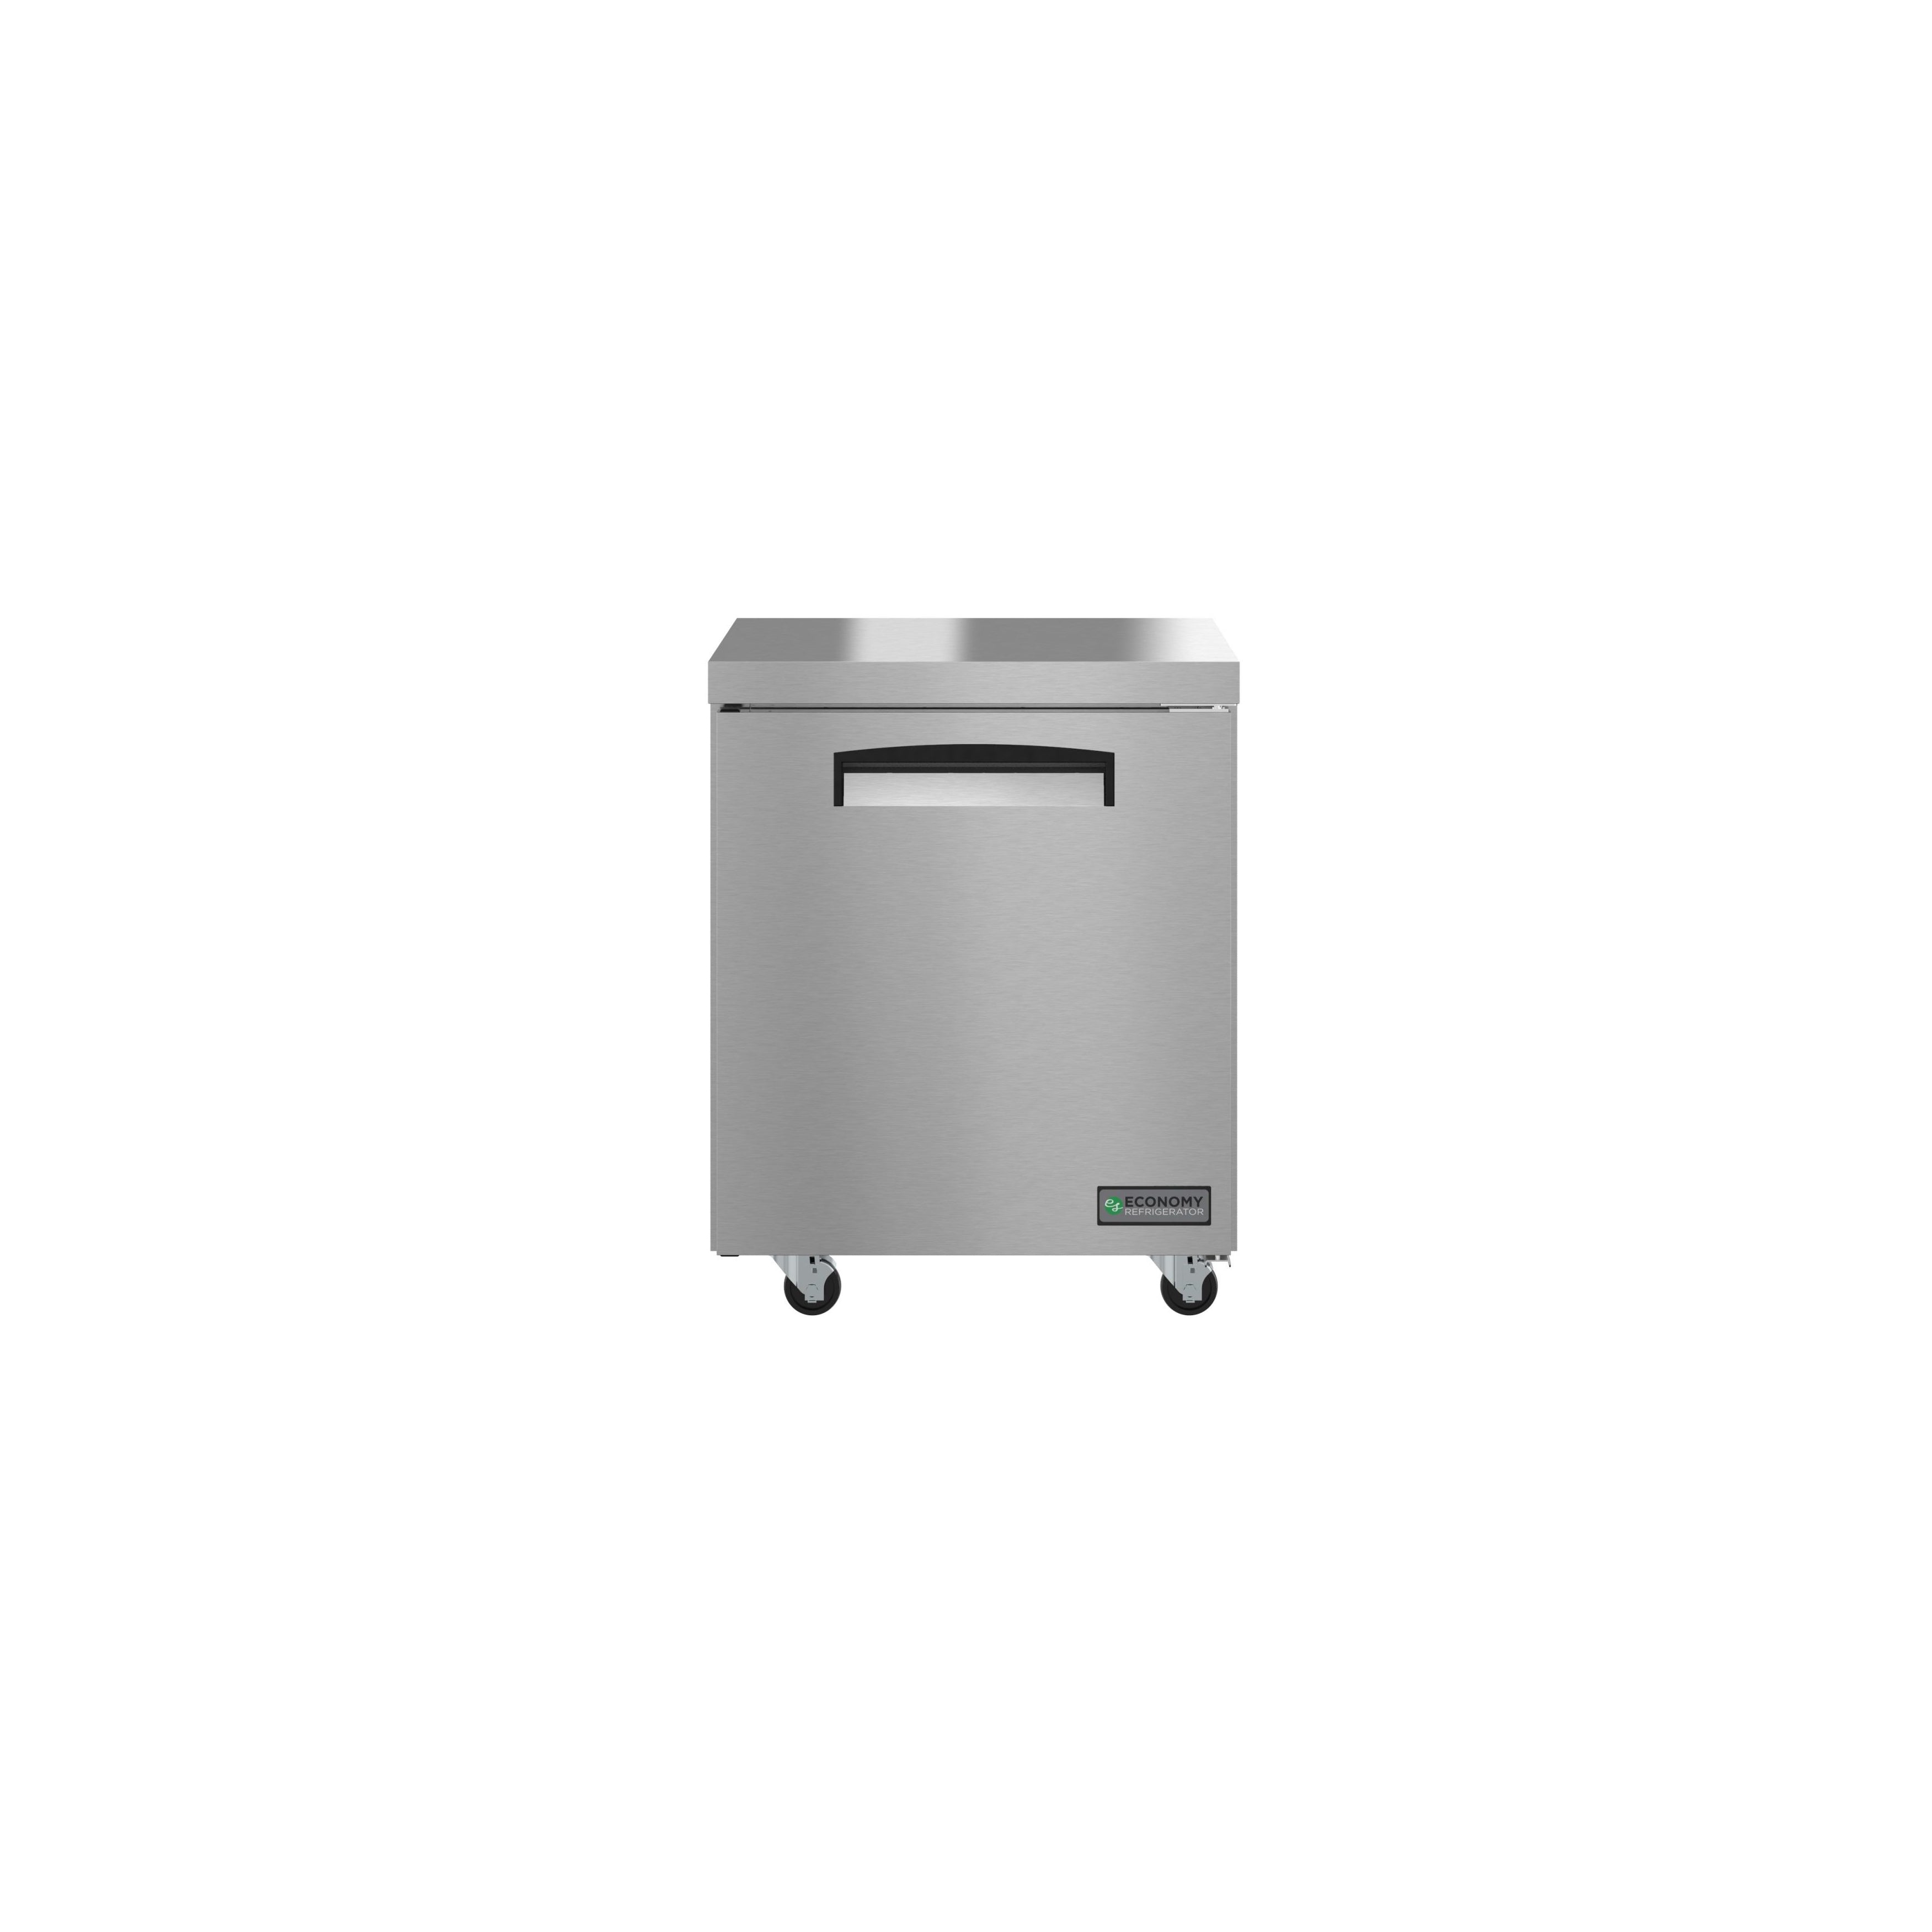 Hoshizaki - EUR27A, Commercial 27" Single Section Undercounter Refrigerator Stainless Door 6.33cu.ft.